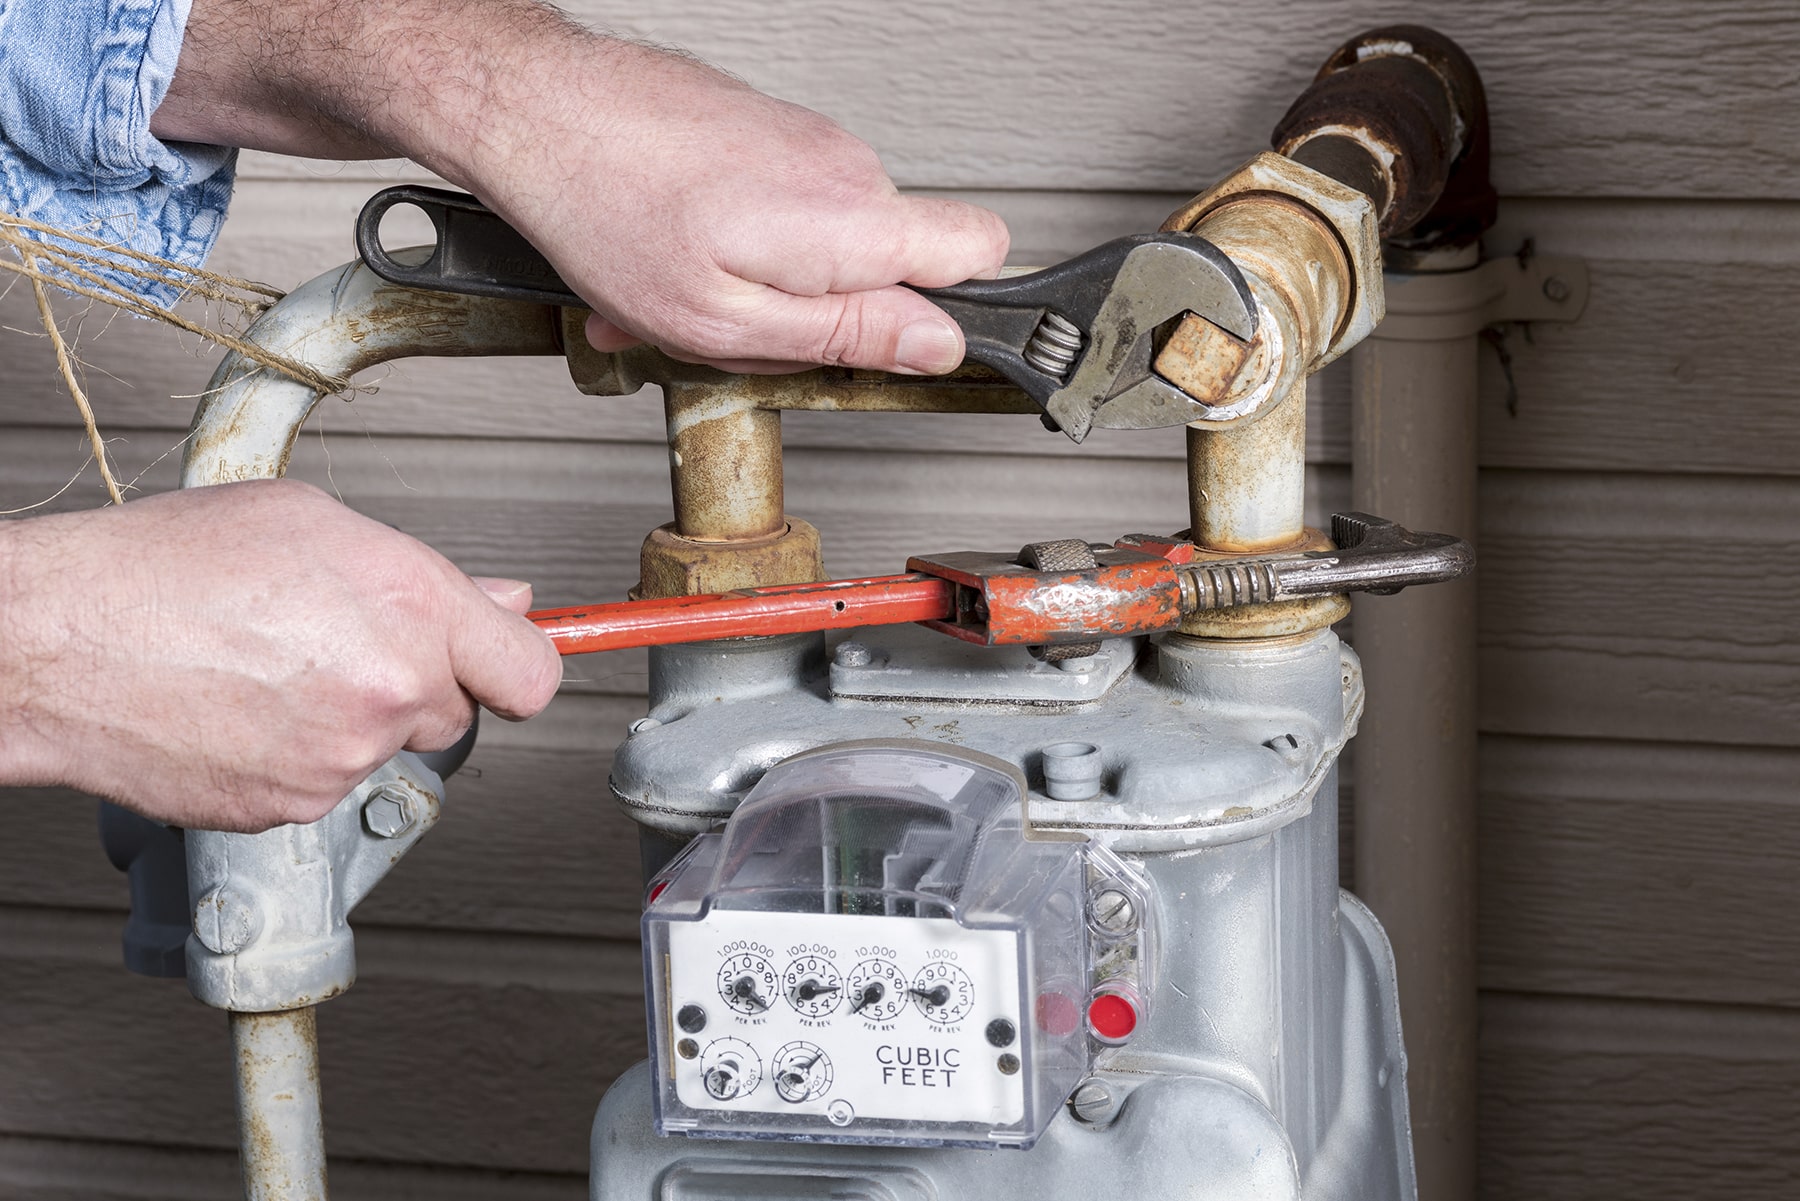 Essential Things You Need to Know to Prevent Gas Leaks